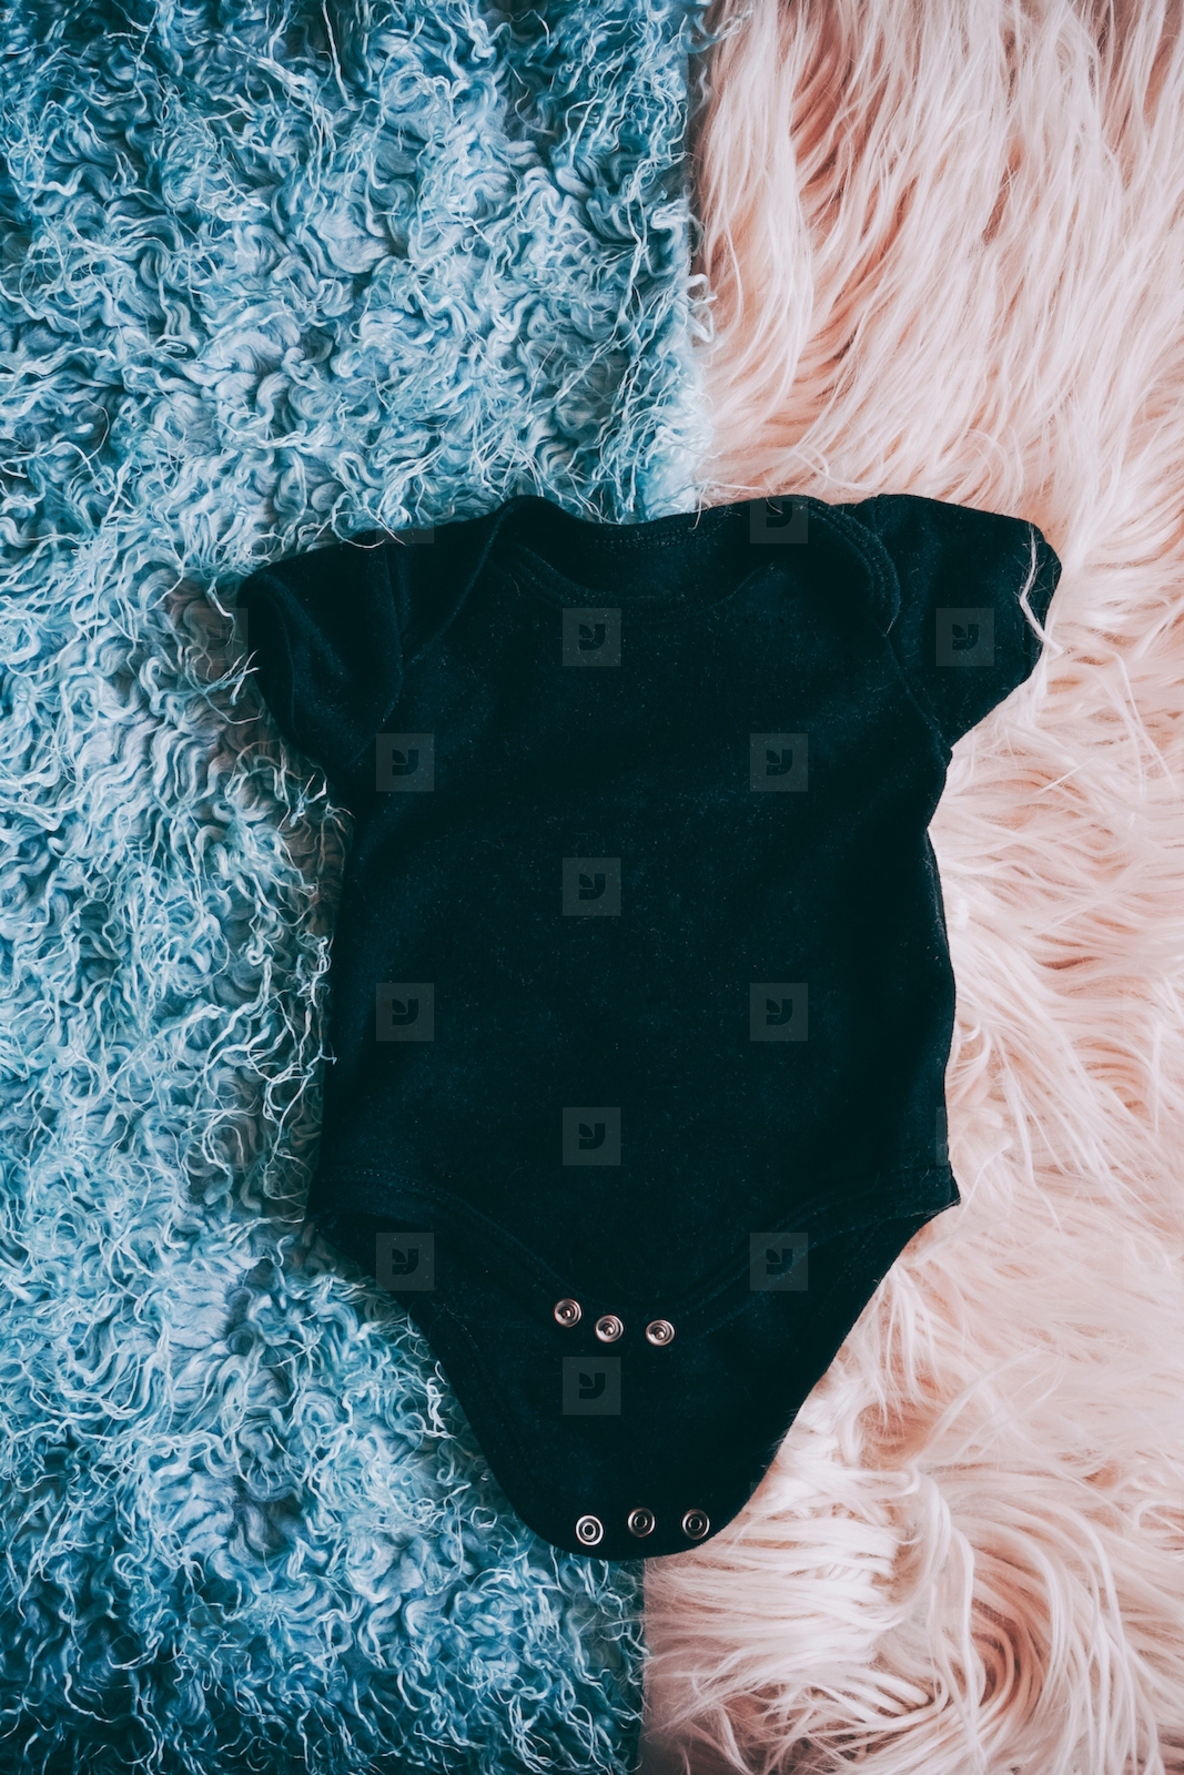 Black baby body agains a soft two colors background